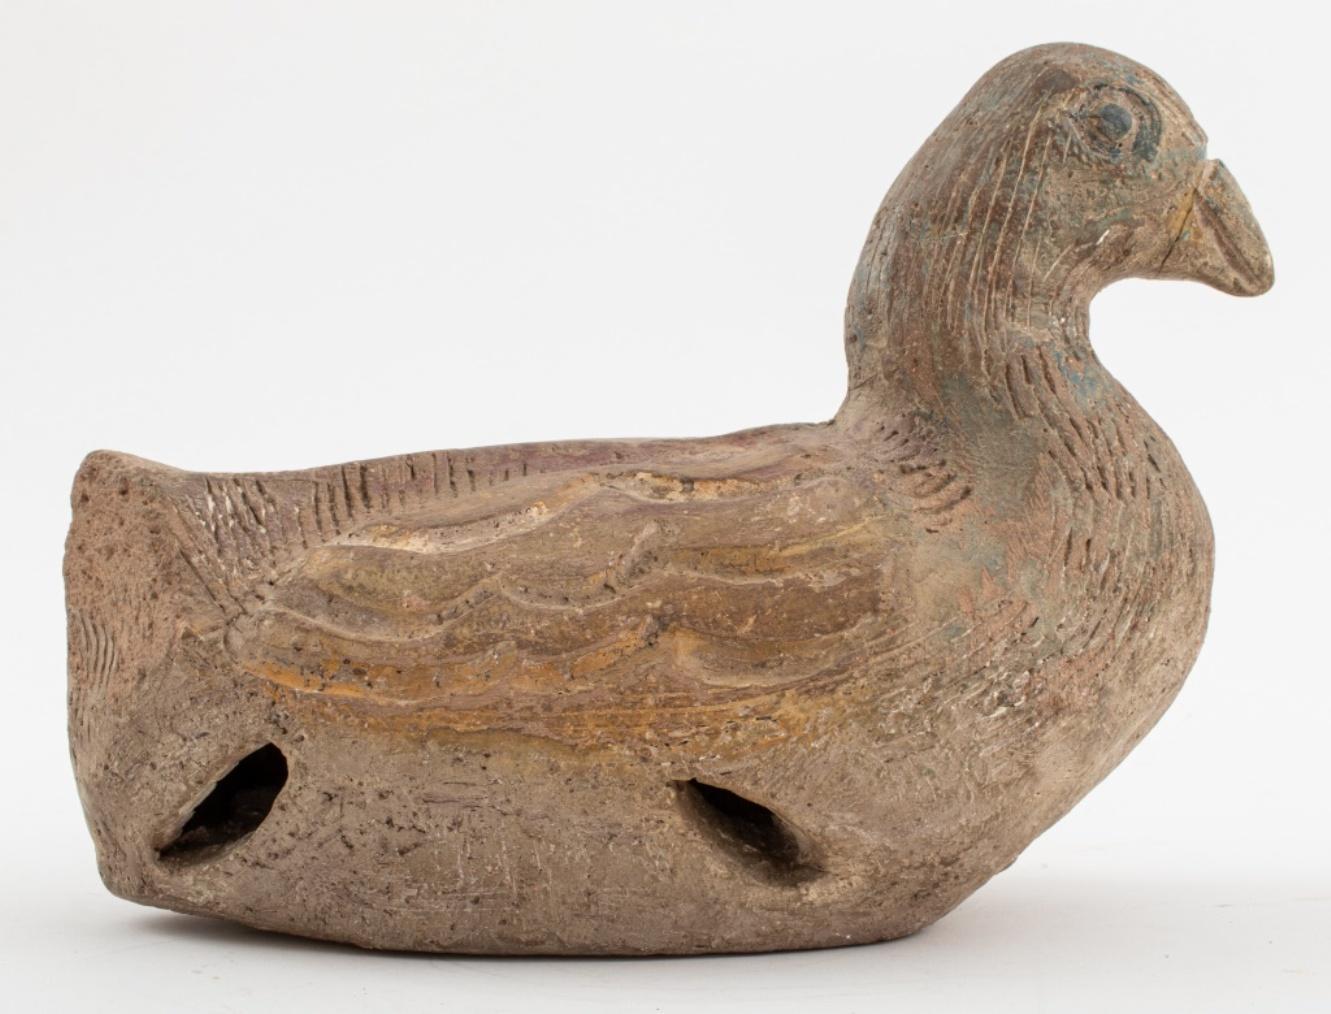 Hand-Crafted Nahum Tschacbasov Ceramic Duck Sculpture For Sale